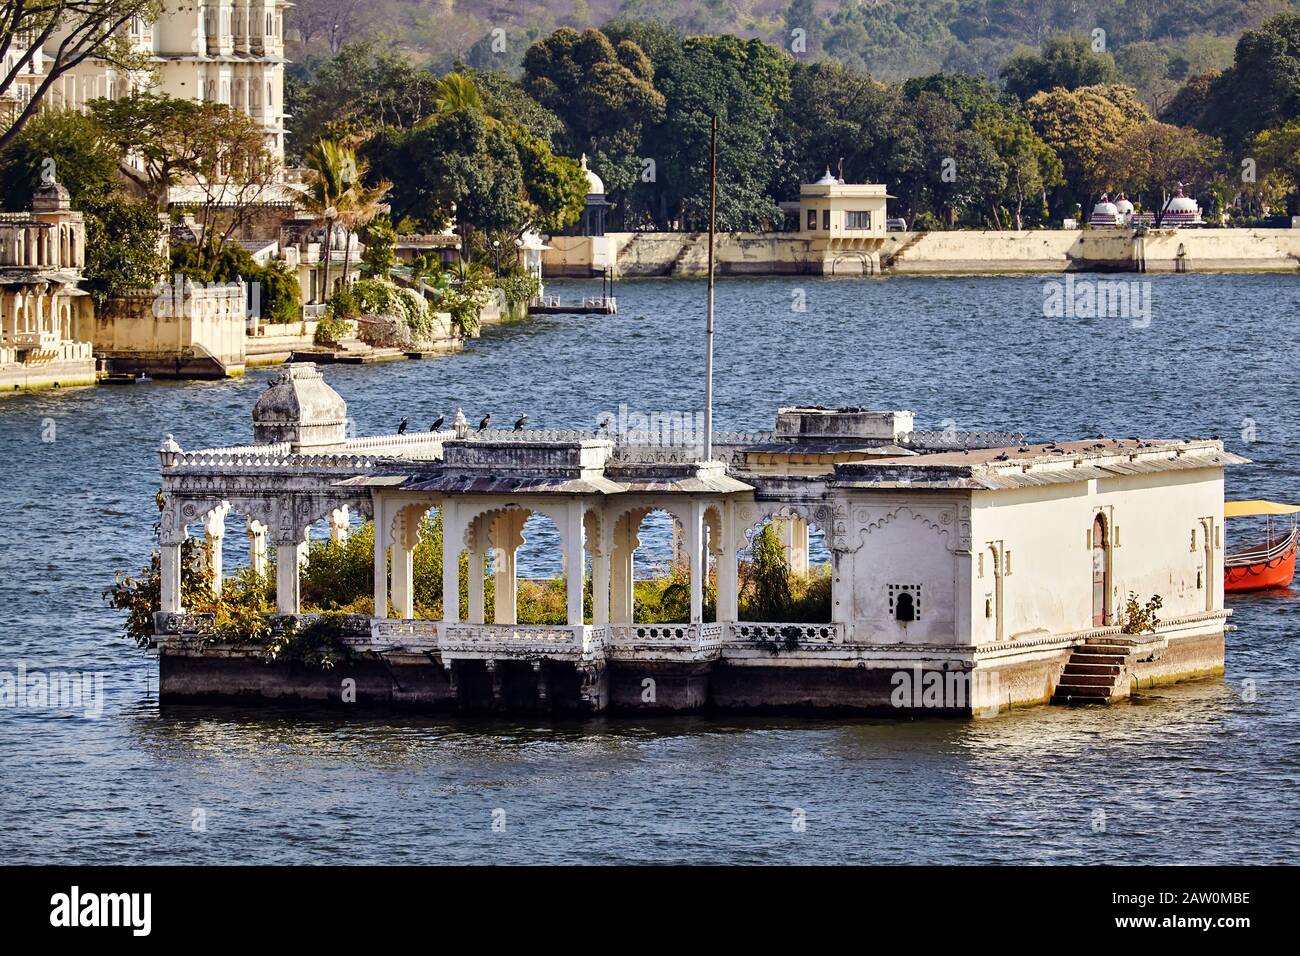 Lake Pichola with City Palace floating garden in Udaipur, Rajasthan, India Stock Photo